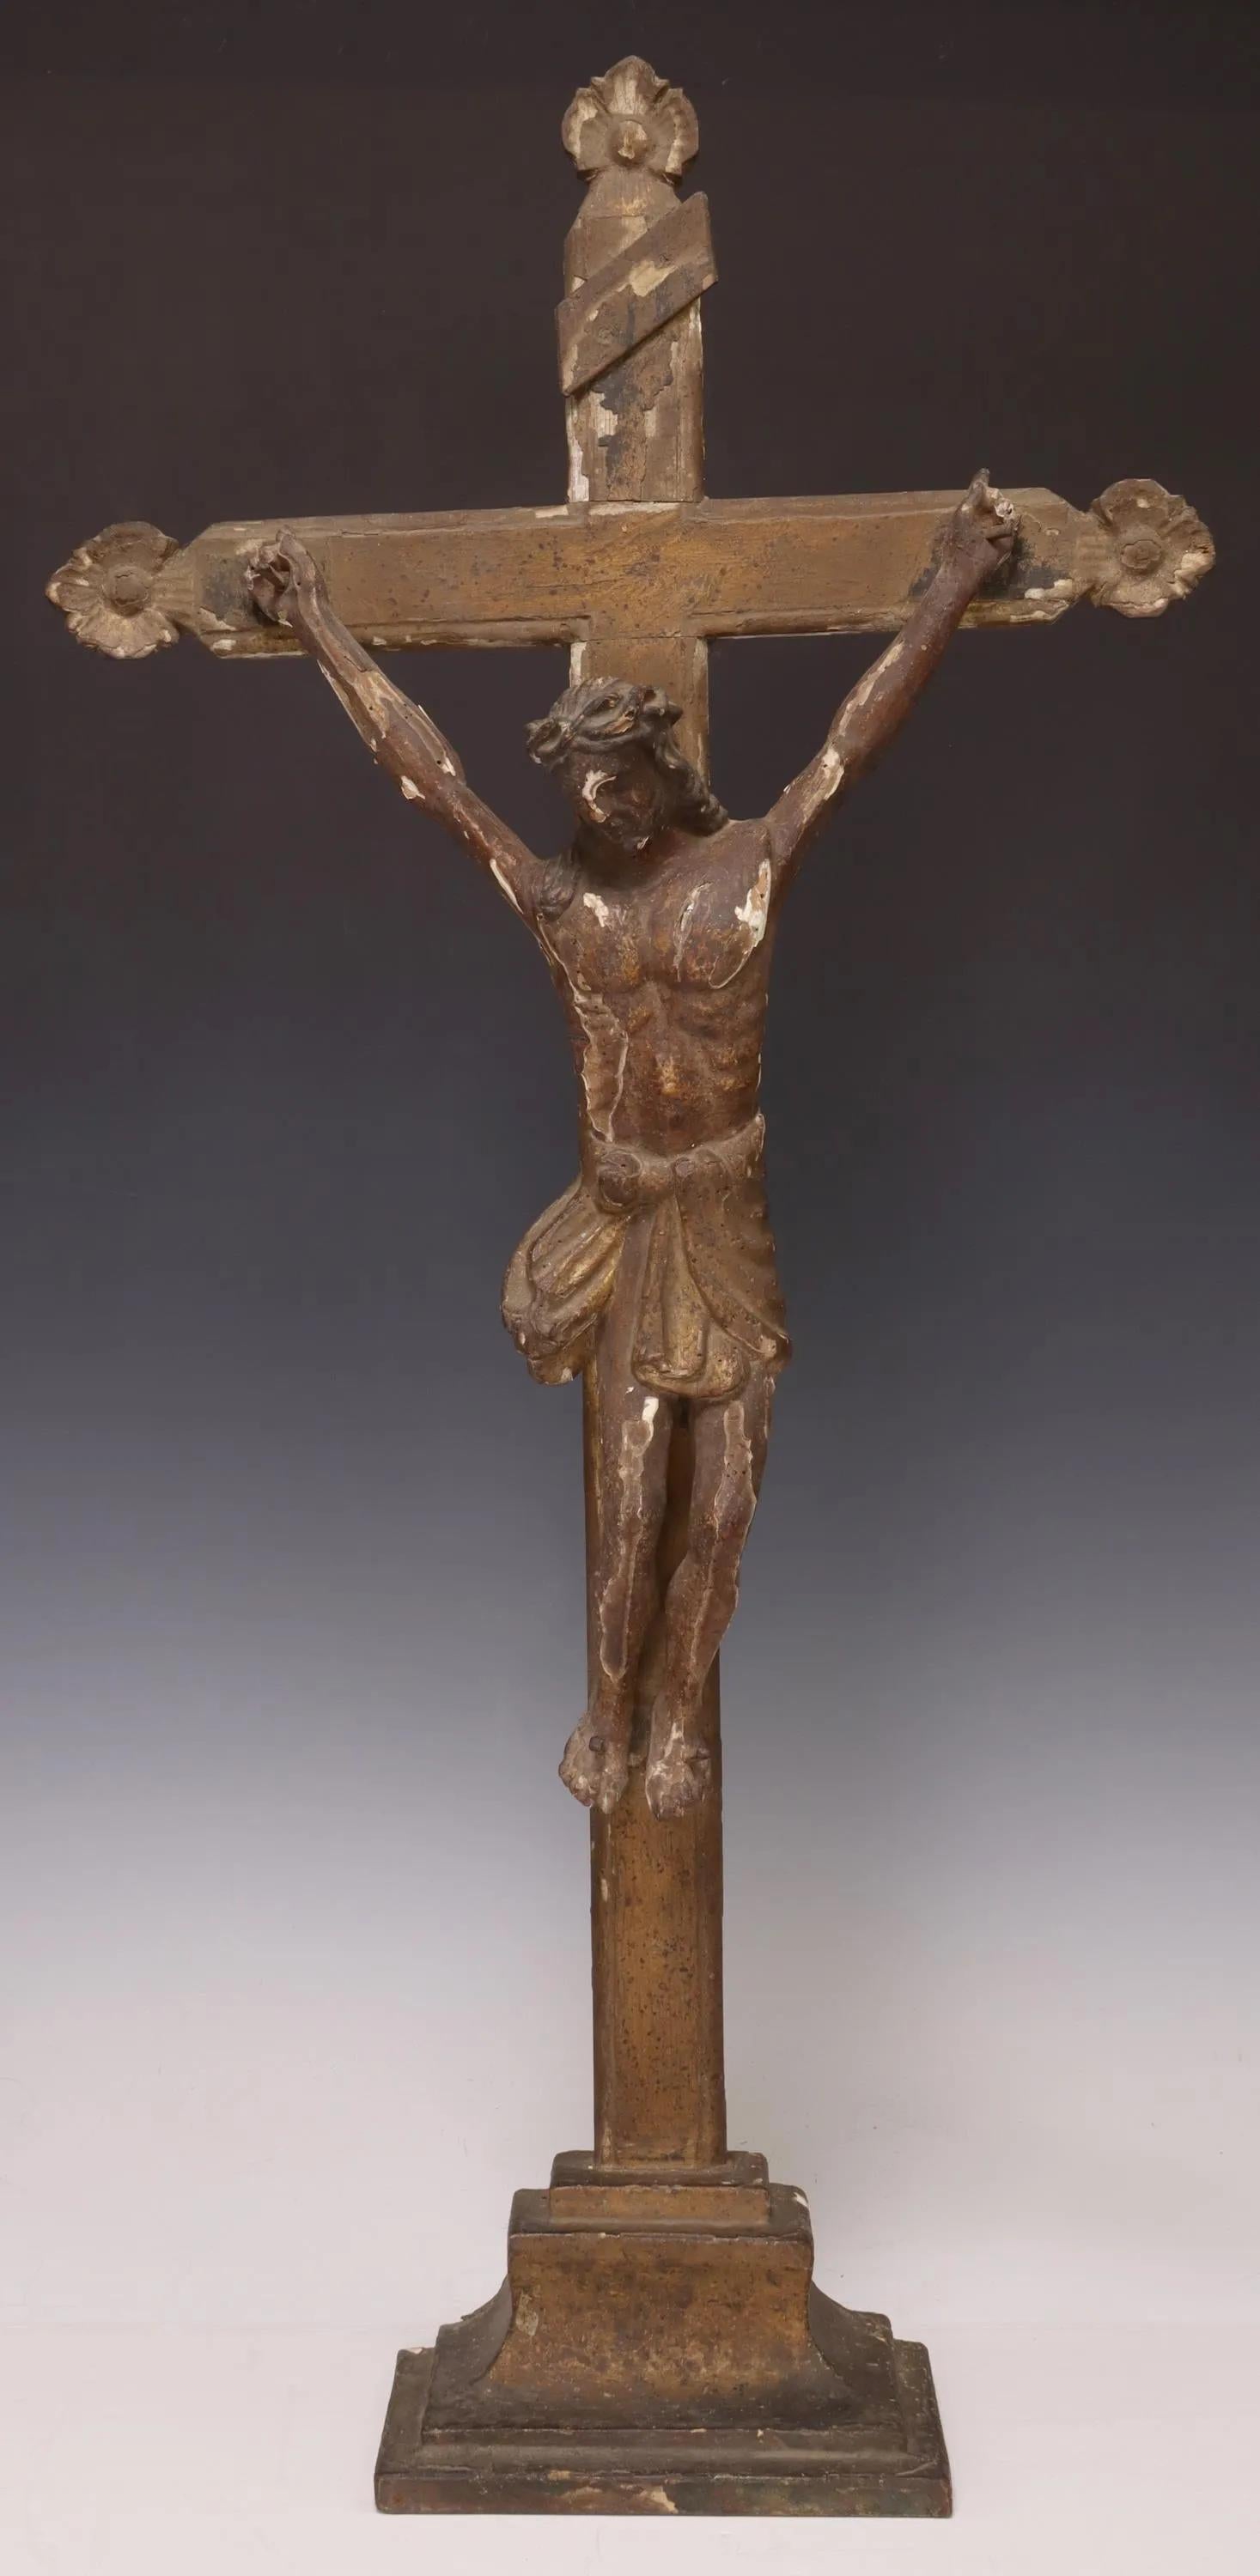 Antique French continental carved wood altar crucifix, composed of gesso and gilt, standing on an integral base. It has typical losses.

Dimensions: approx 29.25